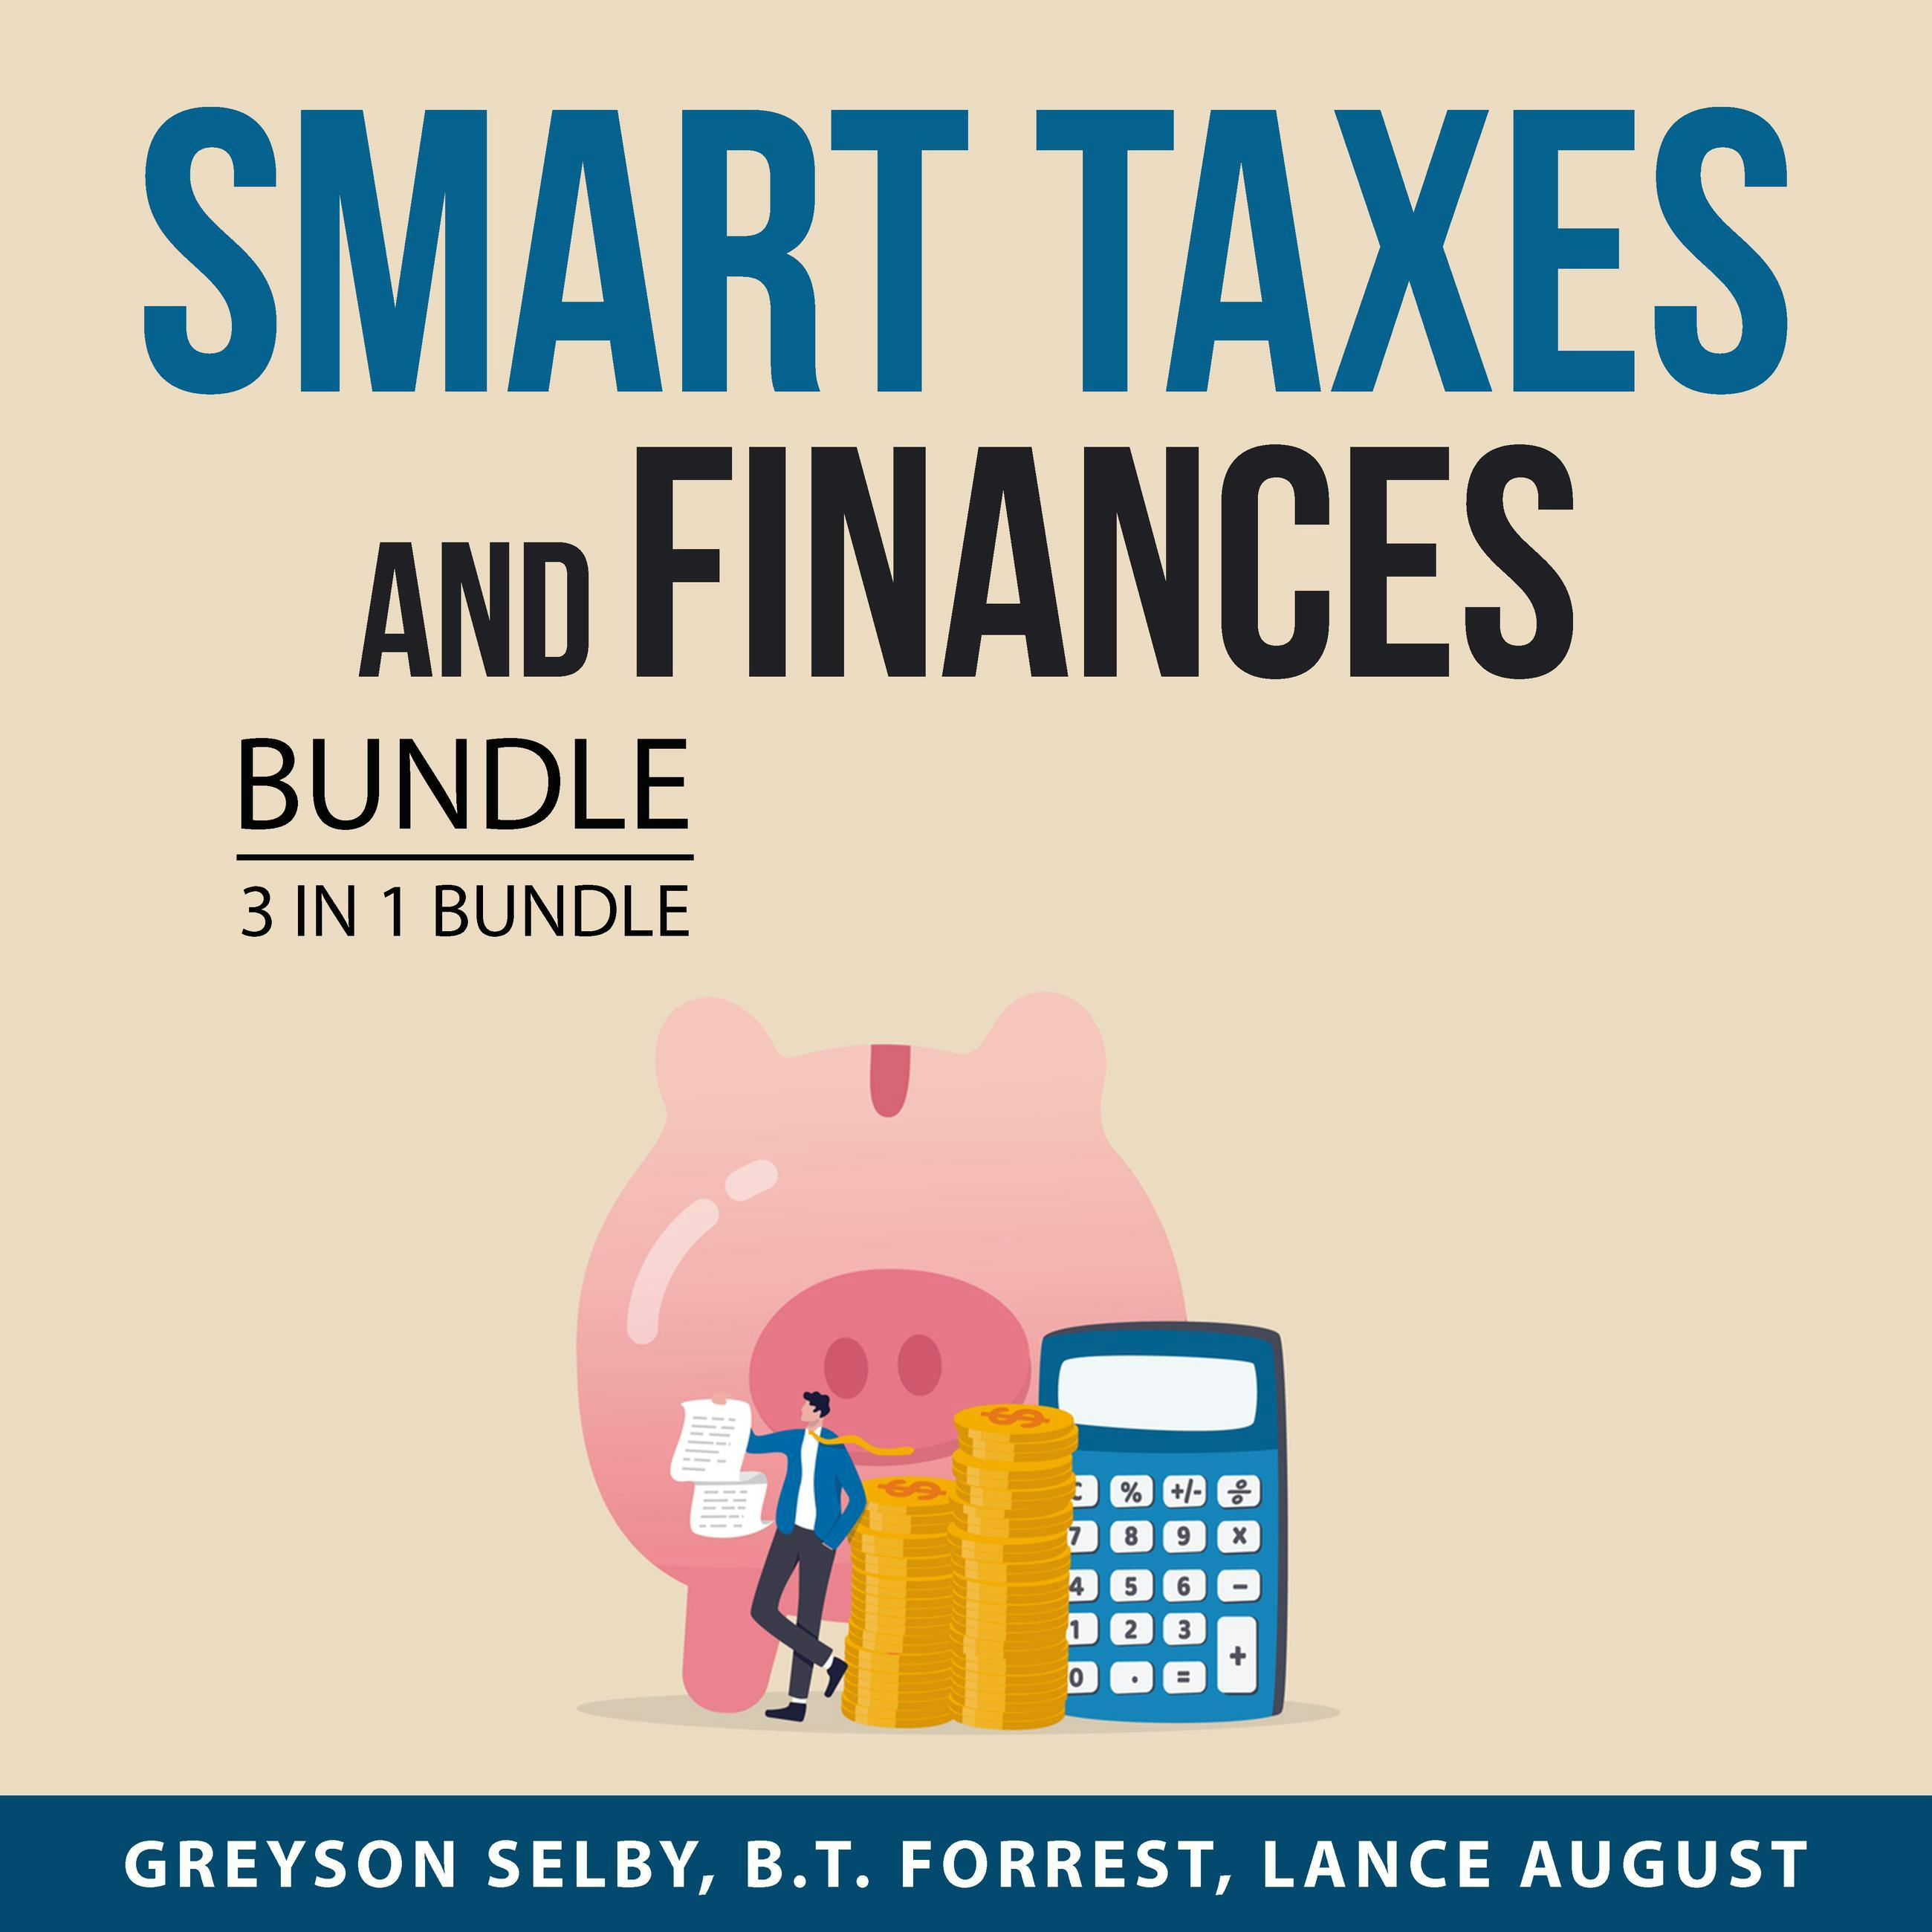 Smart Taxes and Finances Bundle, 3 in 1 Bundle: Online Business Taxes, Smart Taxes, and Financial Independence Blueprint - Greyson Selby, B.T. Forrest, Lance August